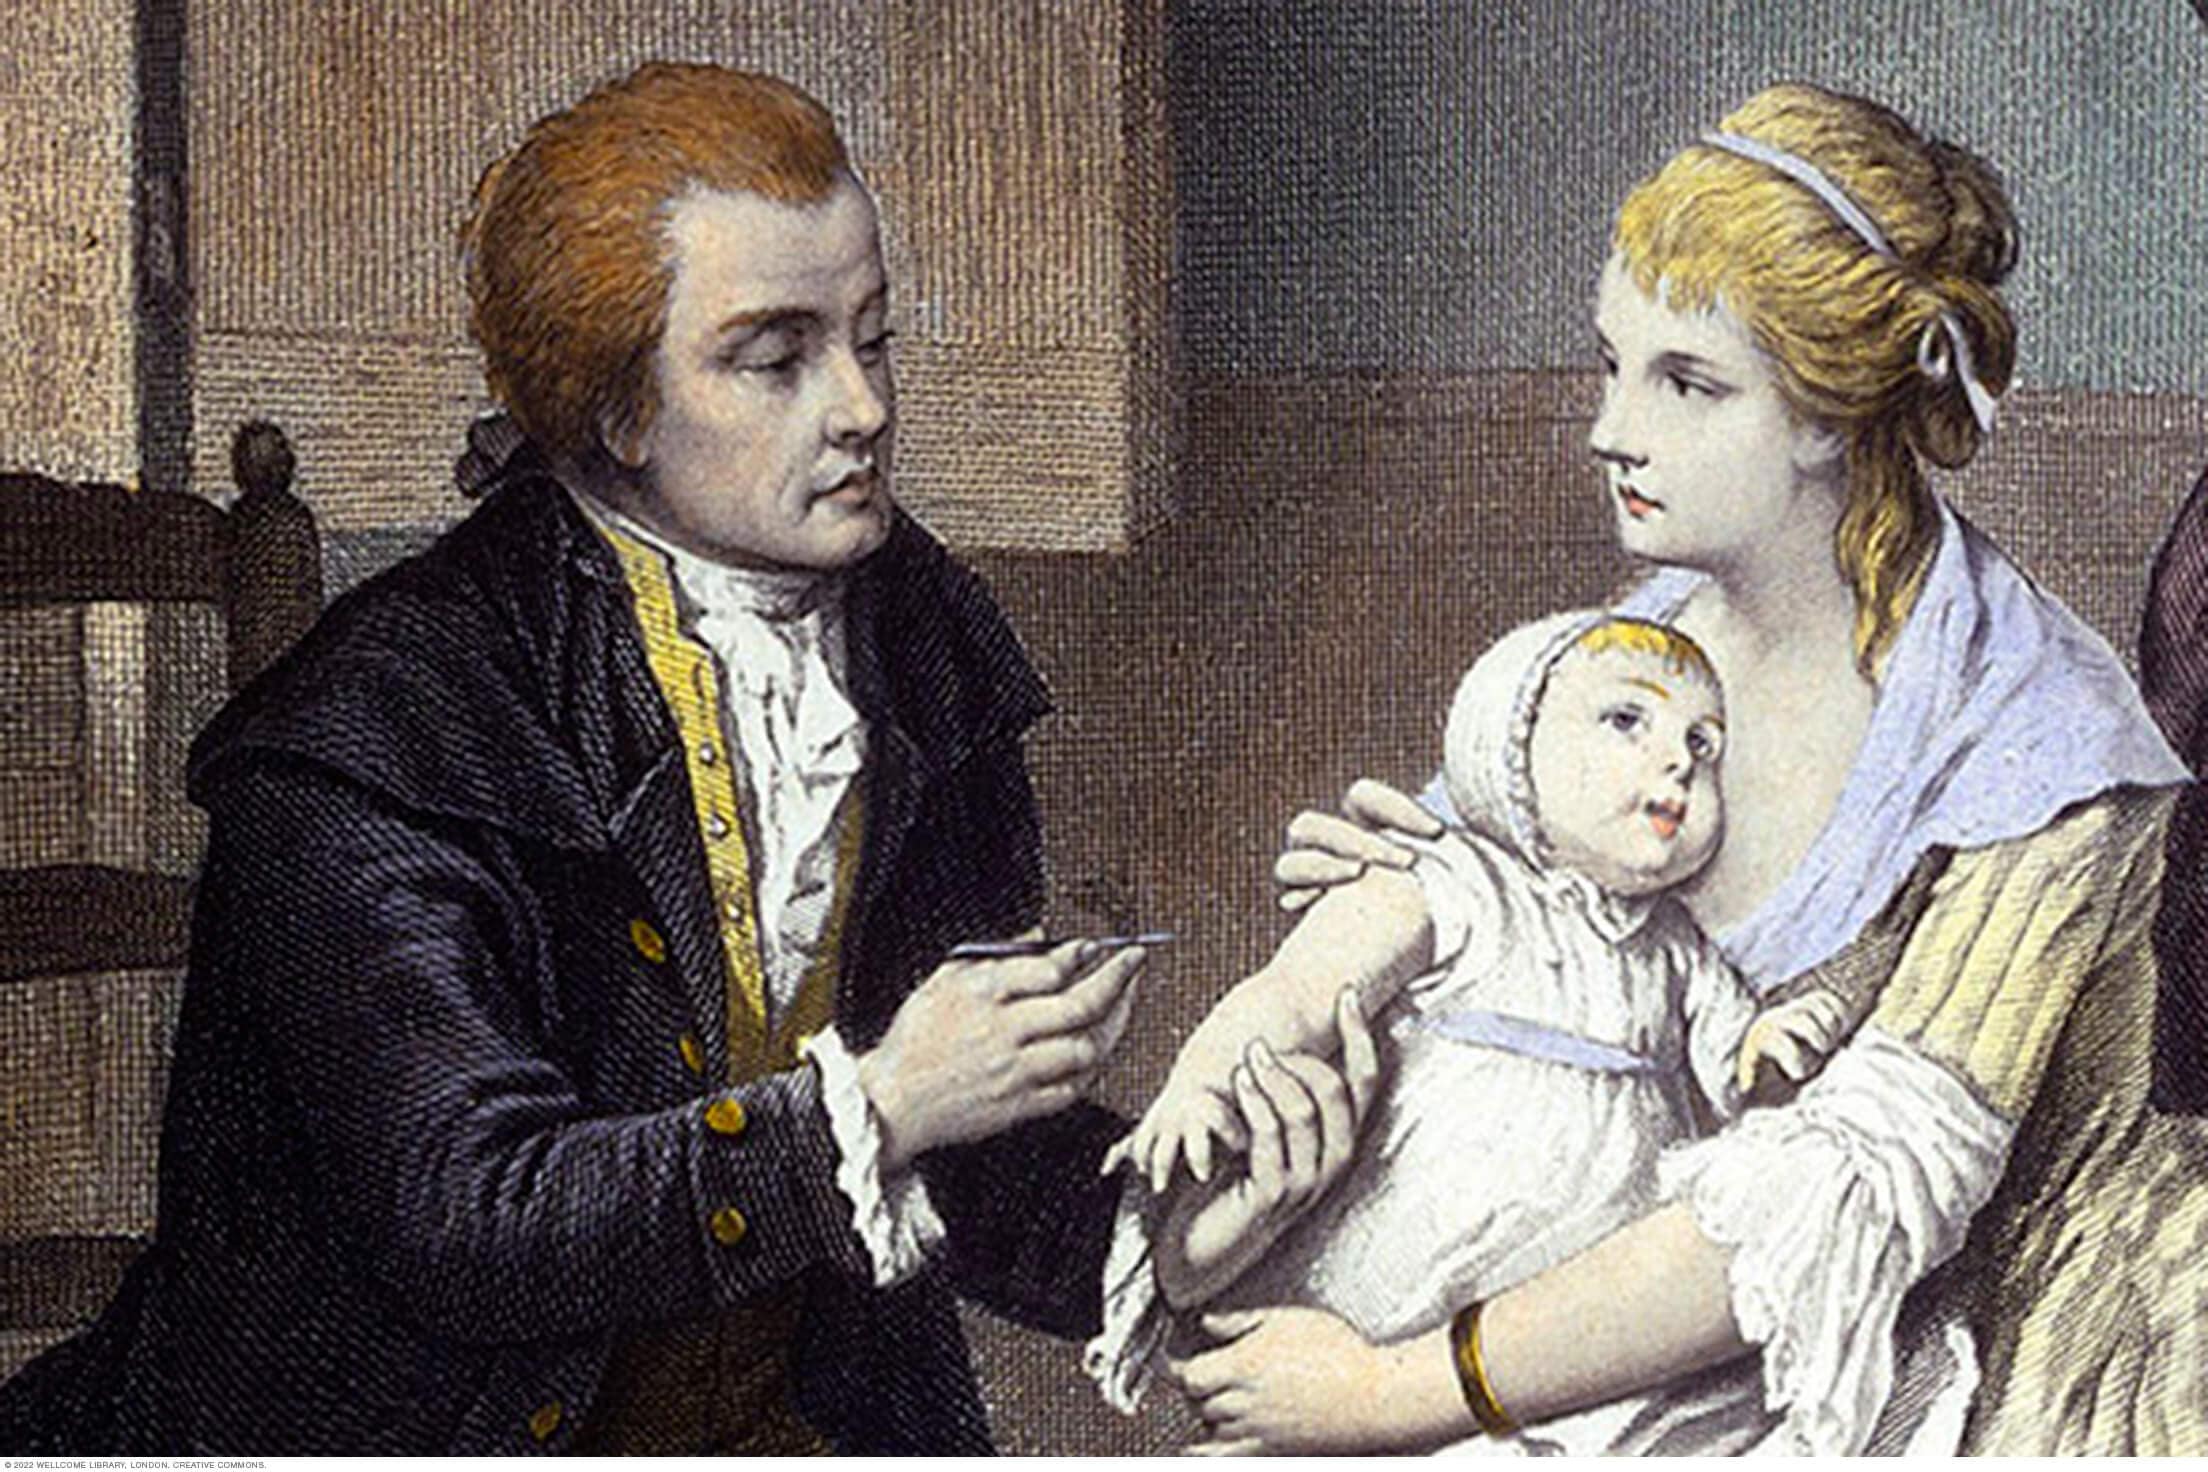 Dr. Edward Jenner vaccinates his child against smallpox.